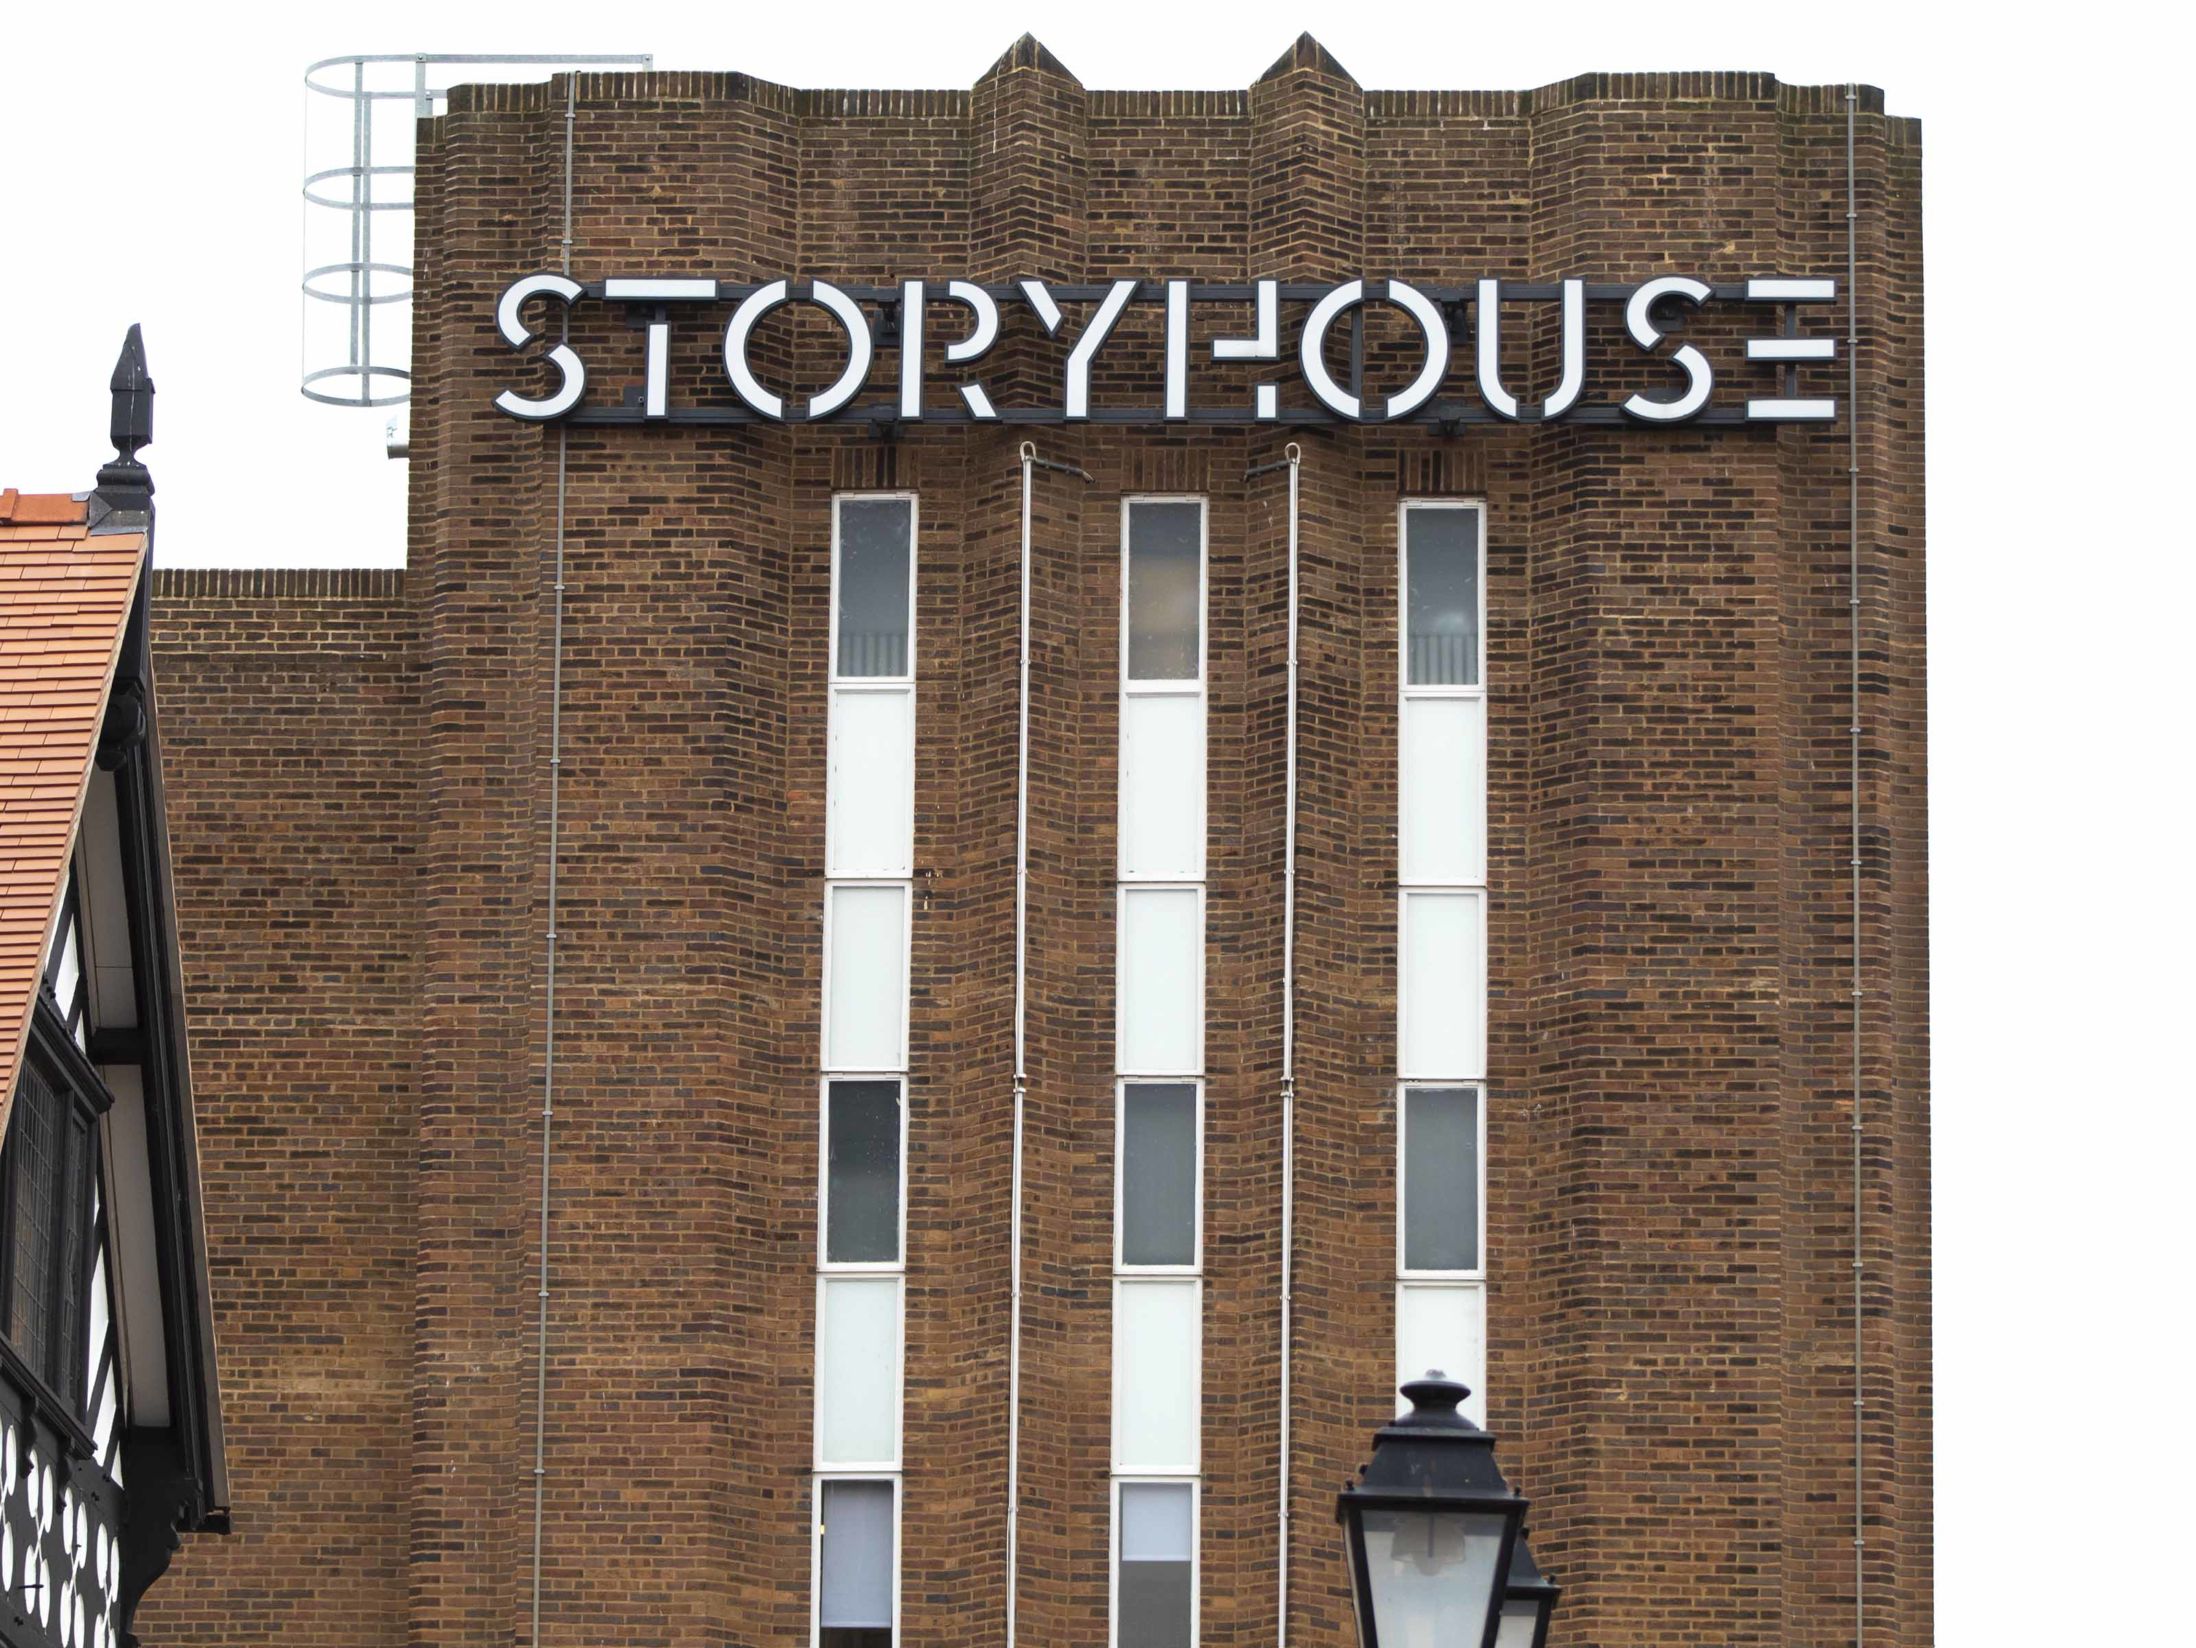 Storyhouse - Things to Do in Chester